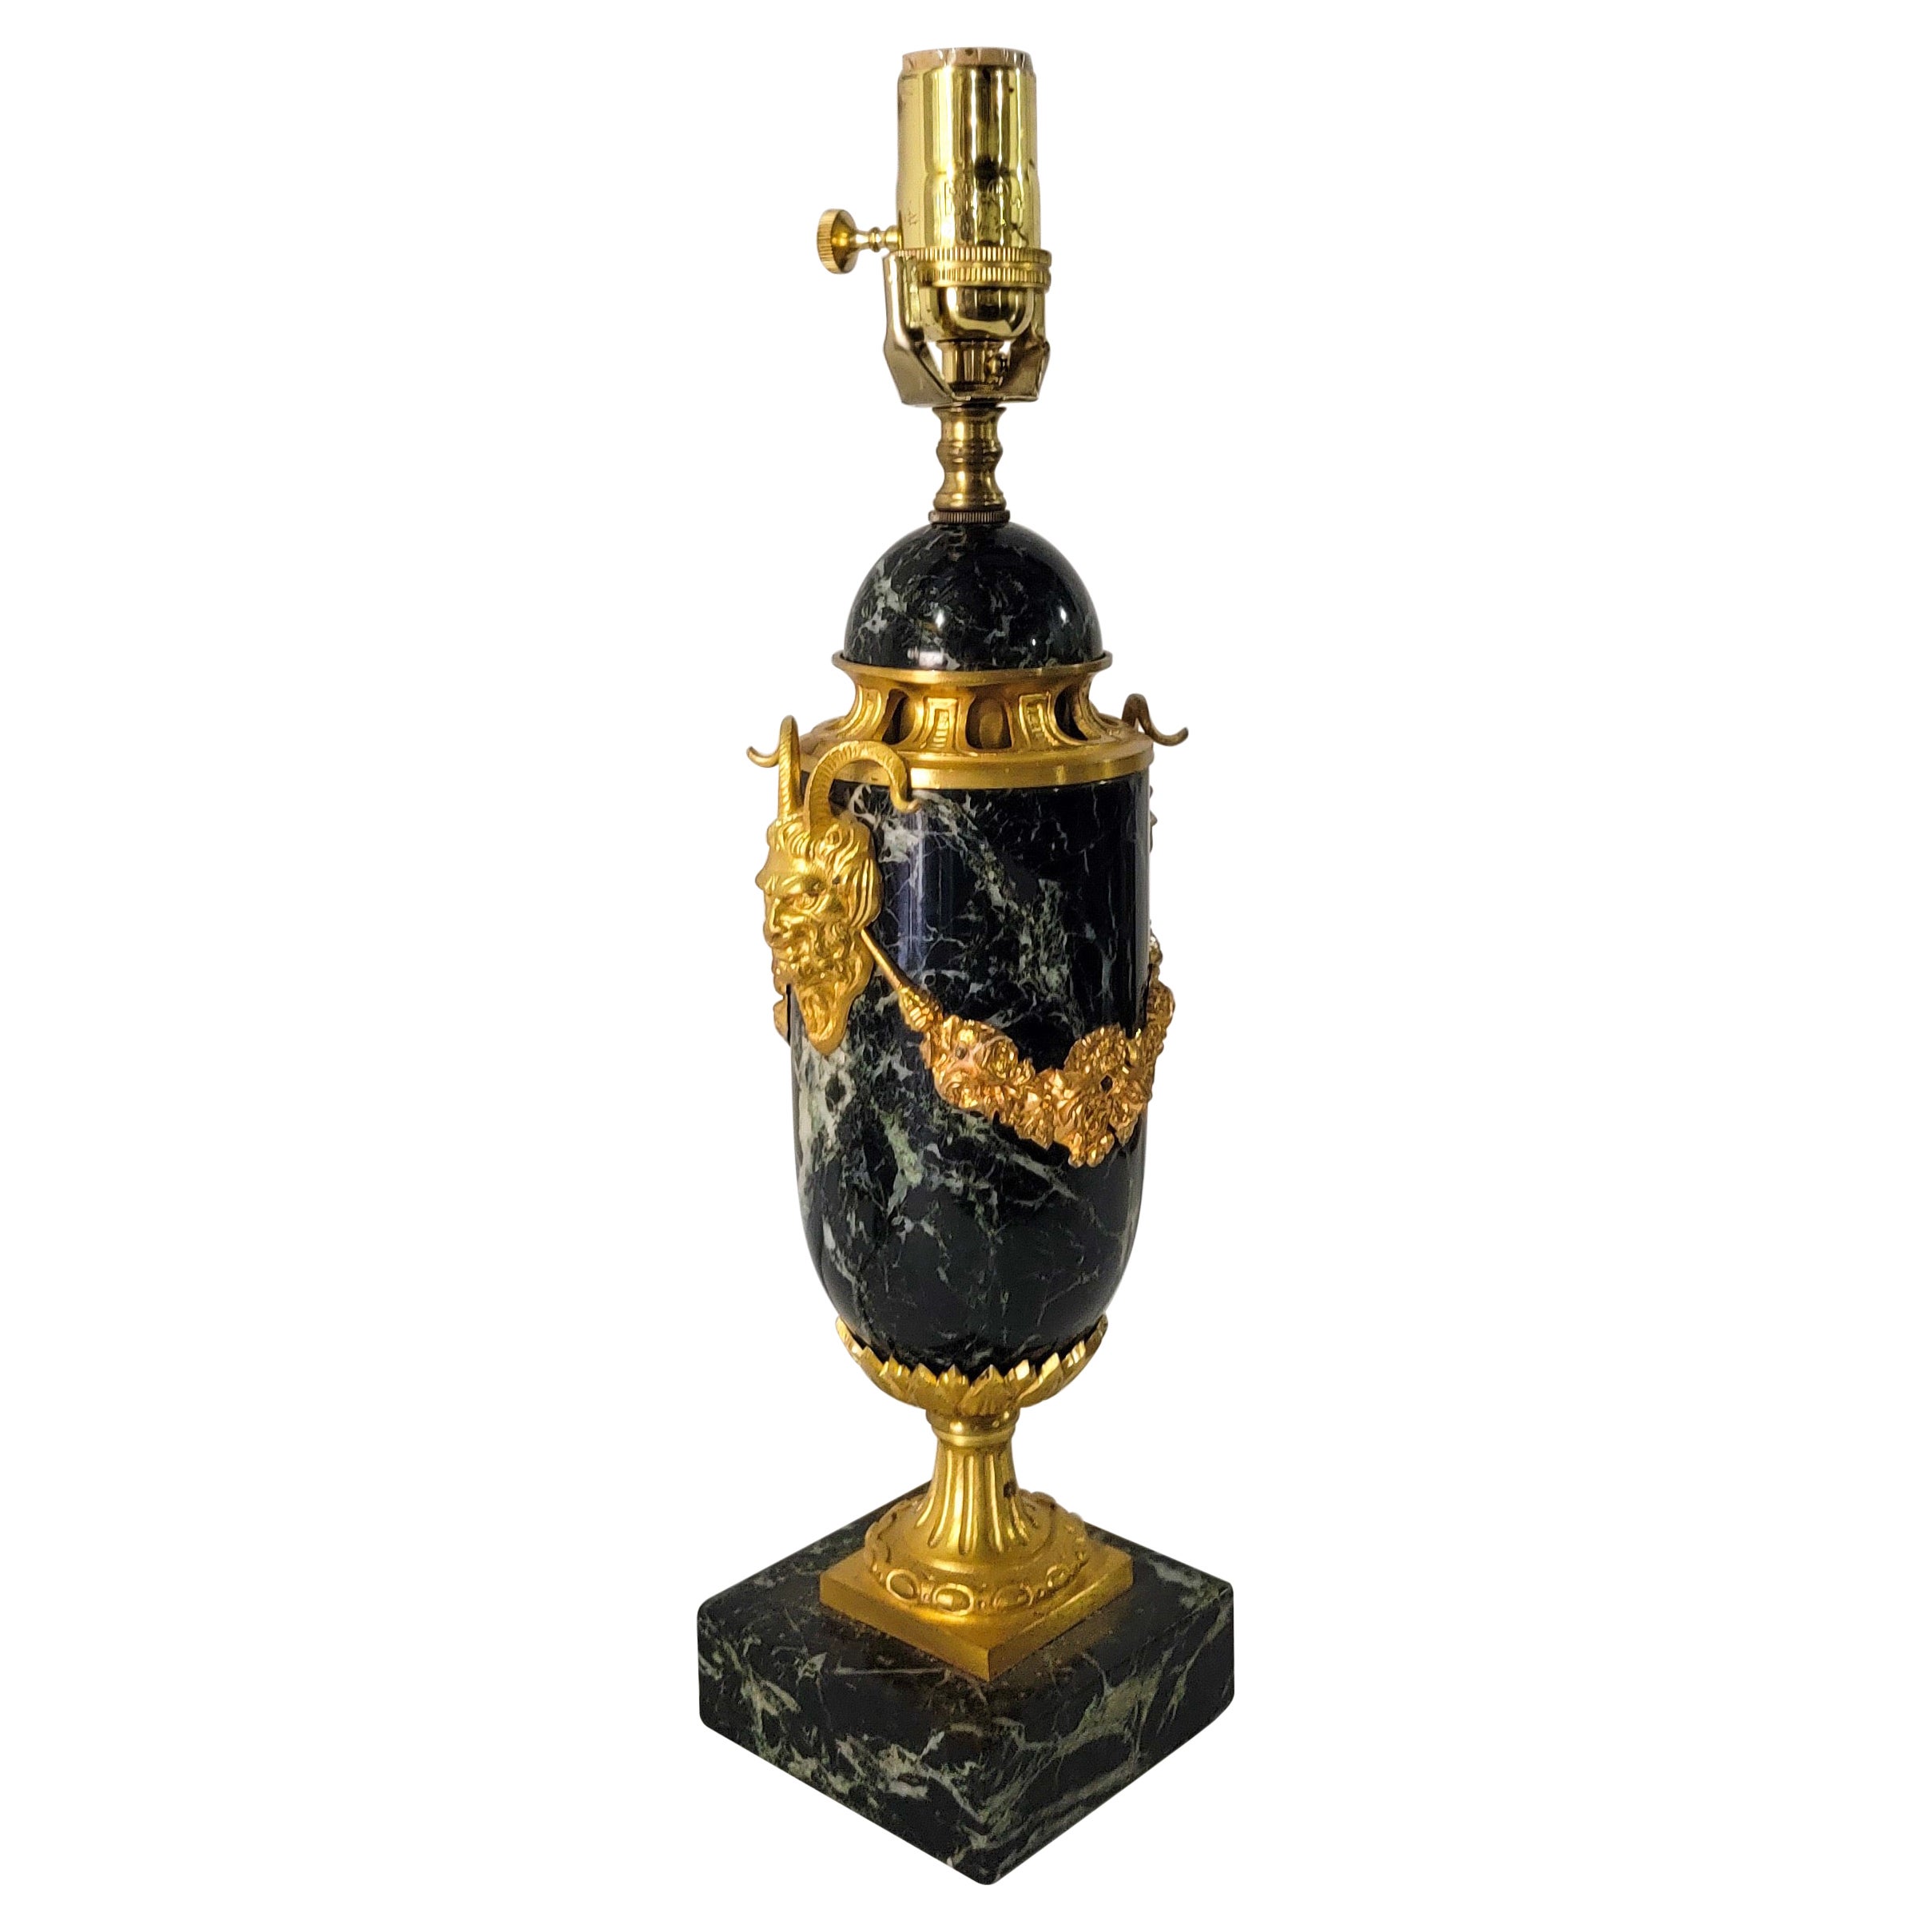 Antique French Neo-Classical Gilt Bronze and Black Marble Urn Lamp